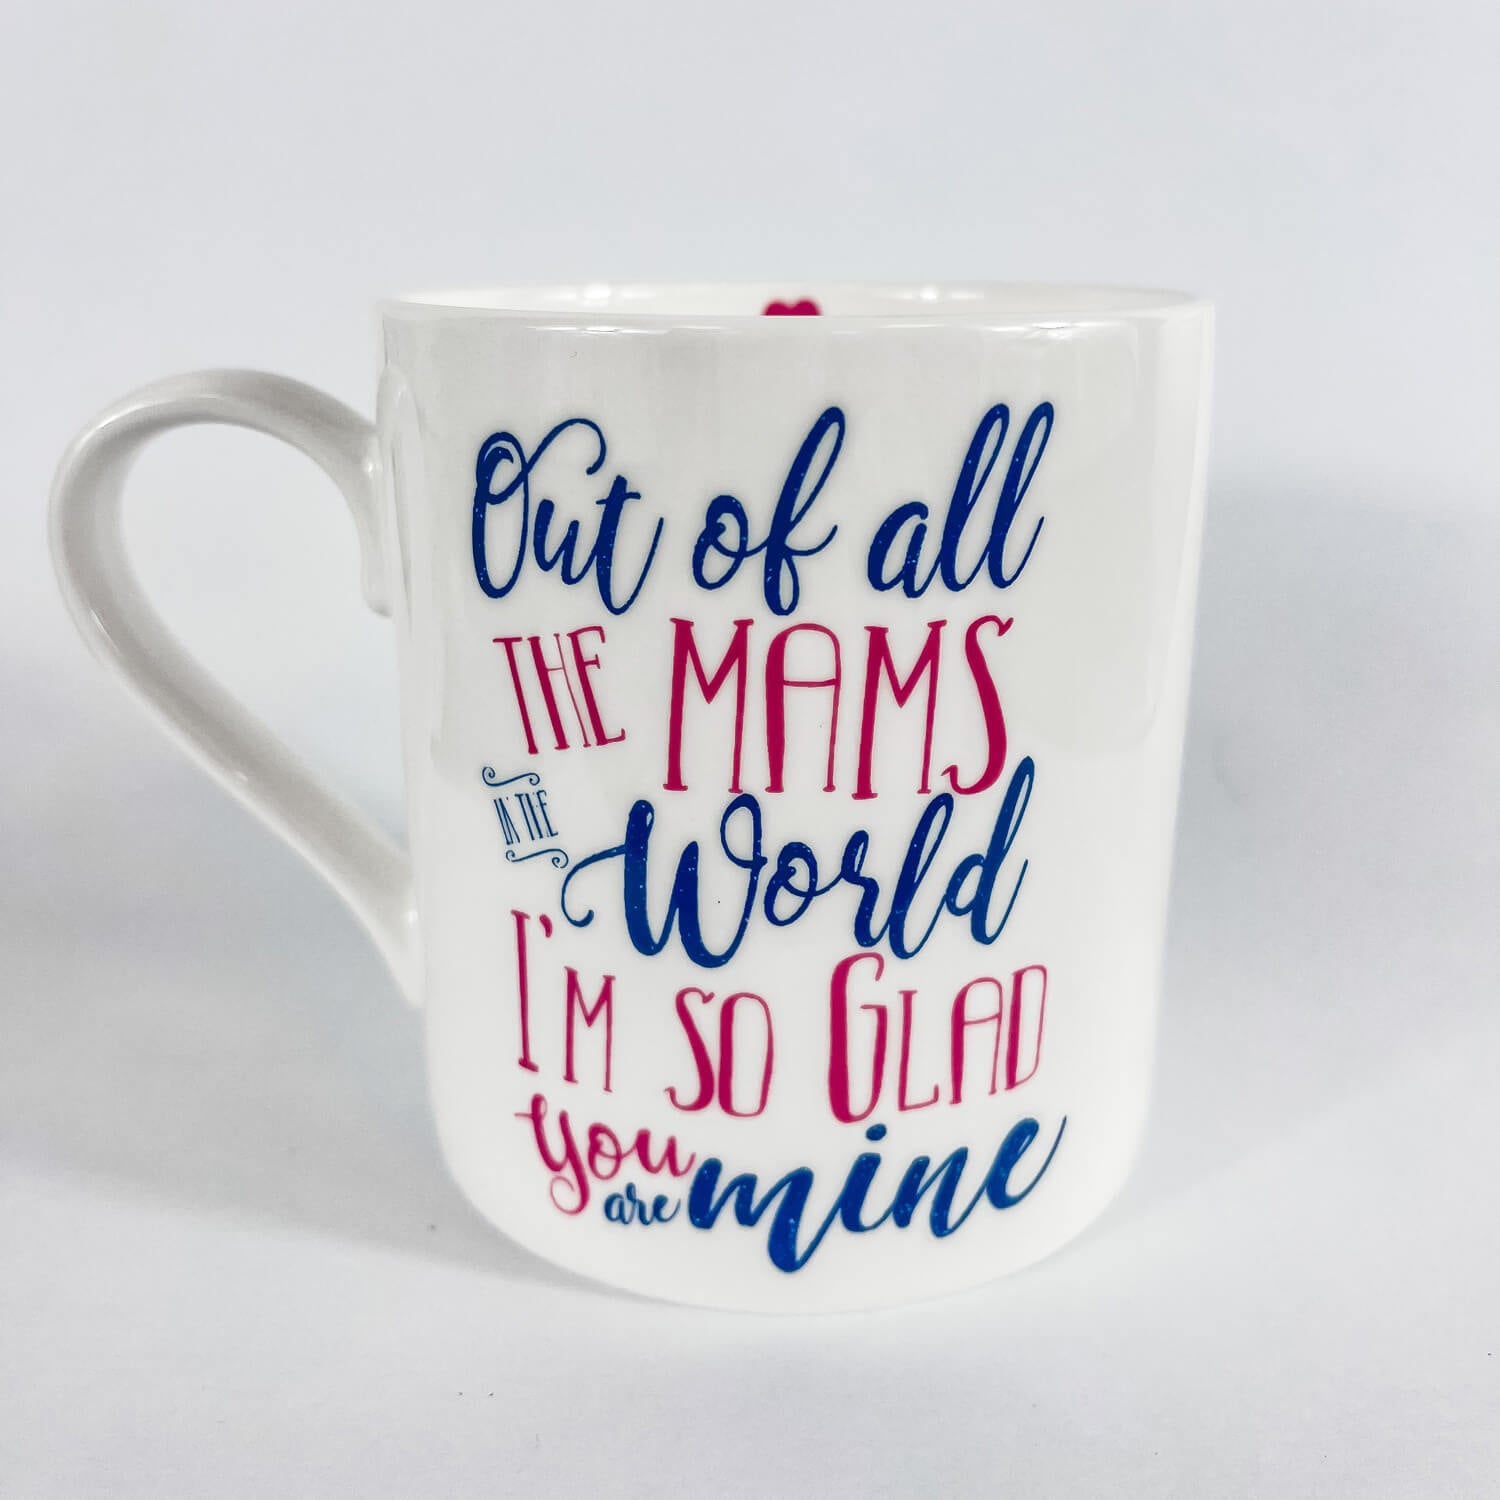 Love The Mug Of All The Mams In The World 1 Shaws Department Stores